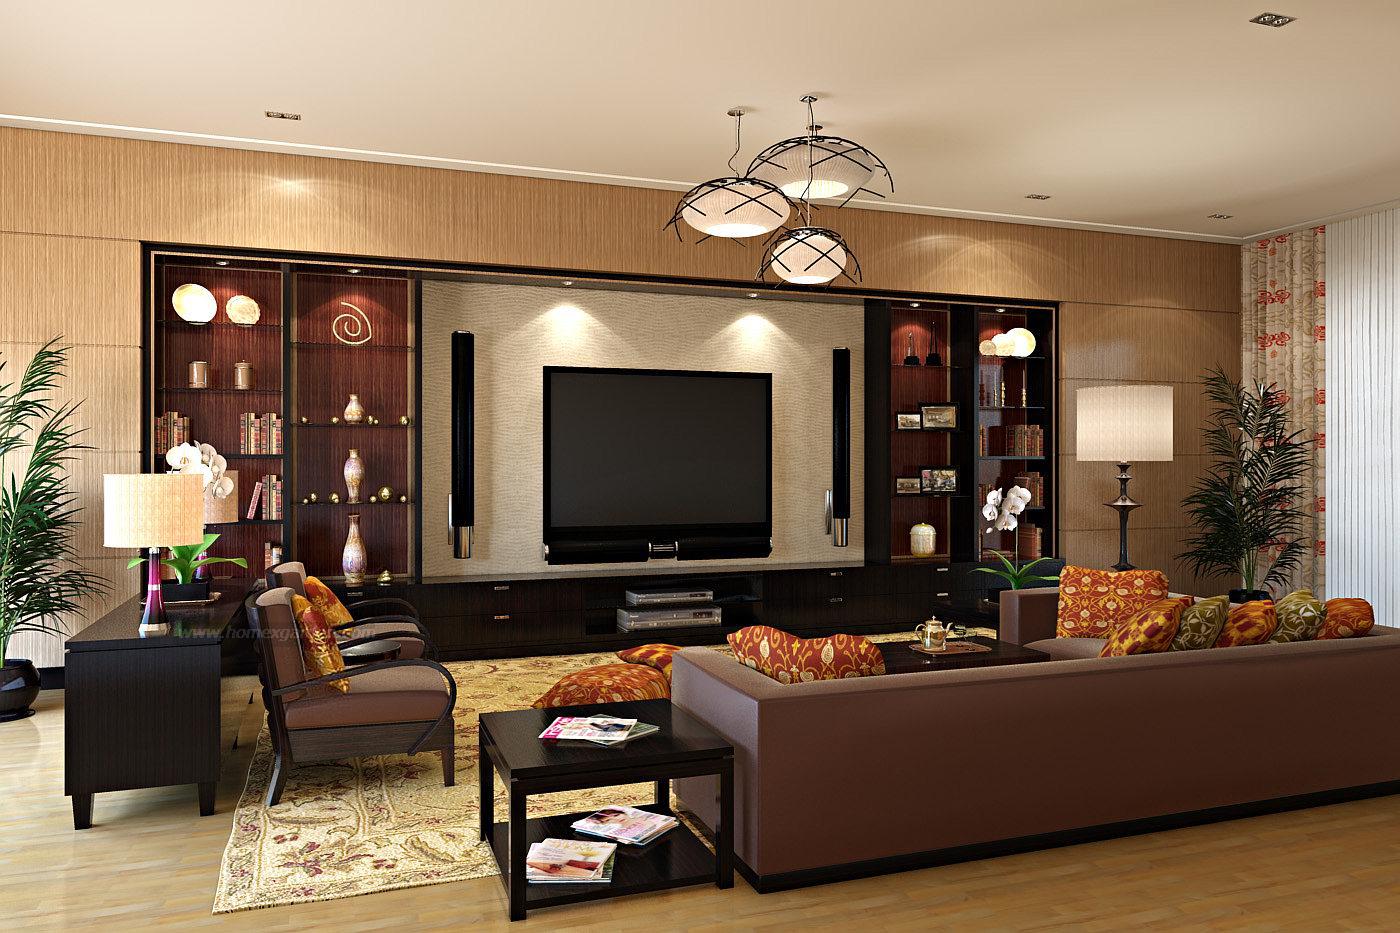 A living room with brown furniture and a tv, designed around the television.